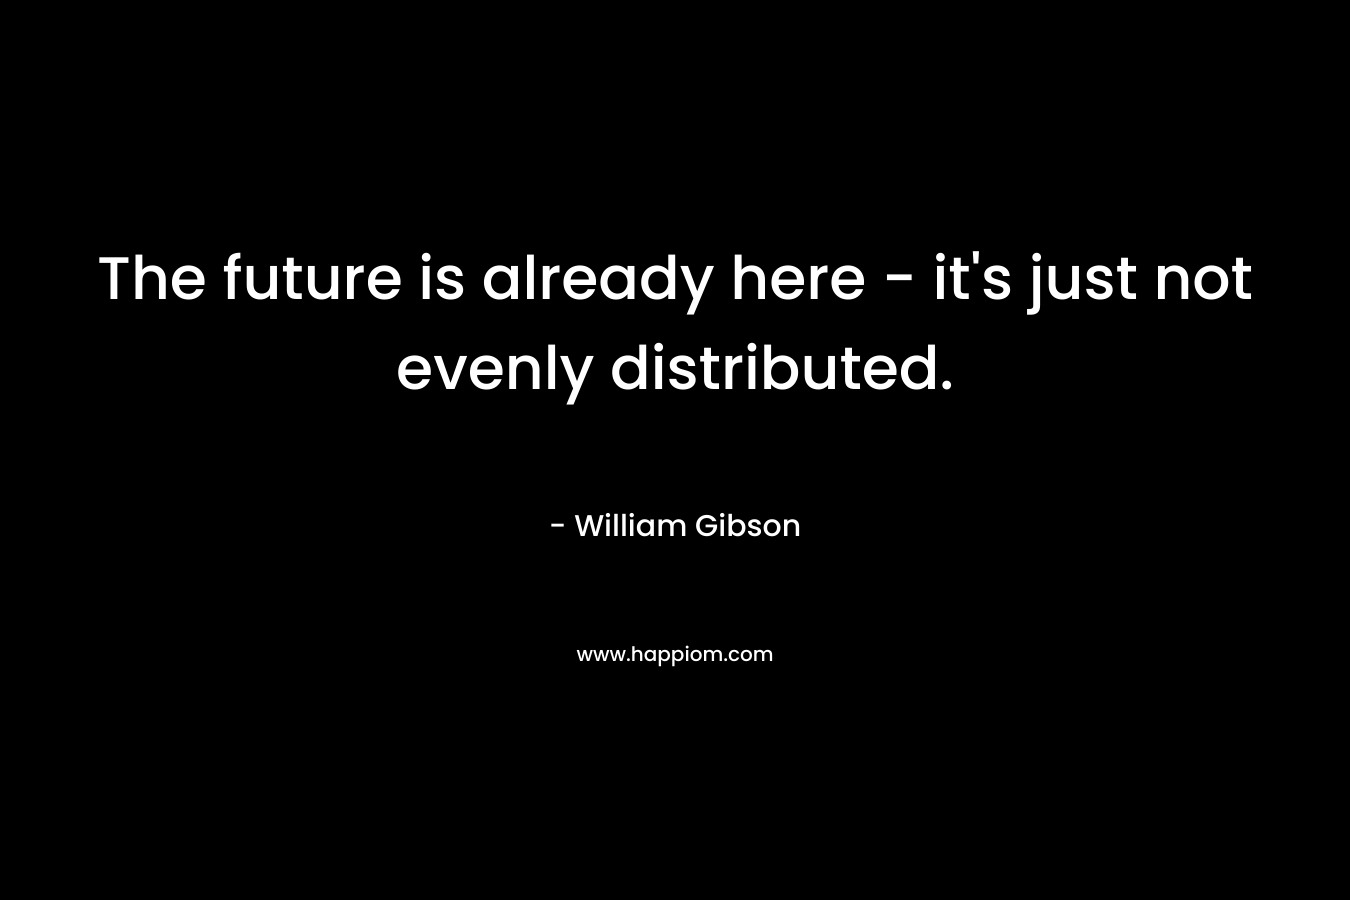 The future is already here - it's just not evenly distributed.